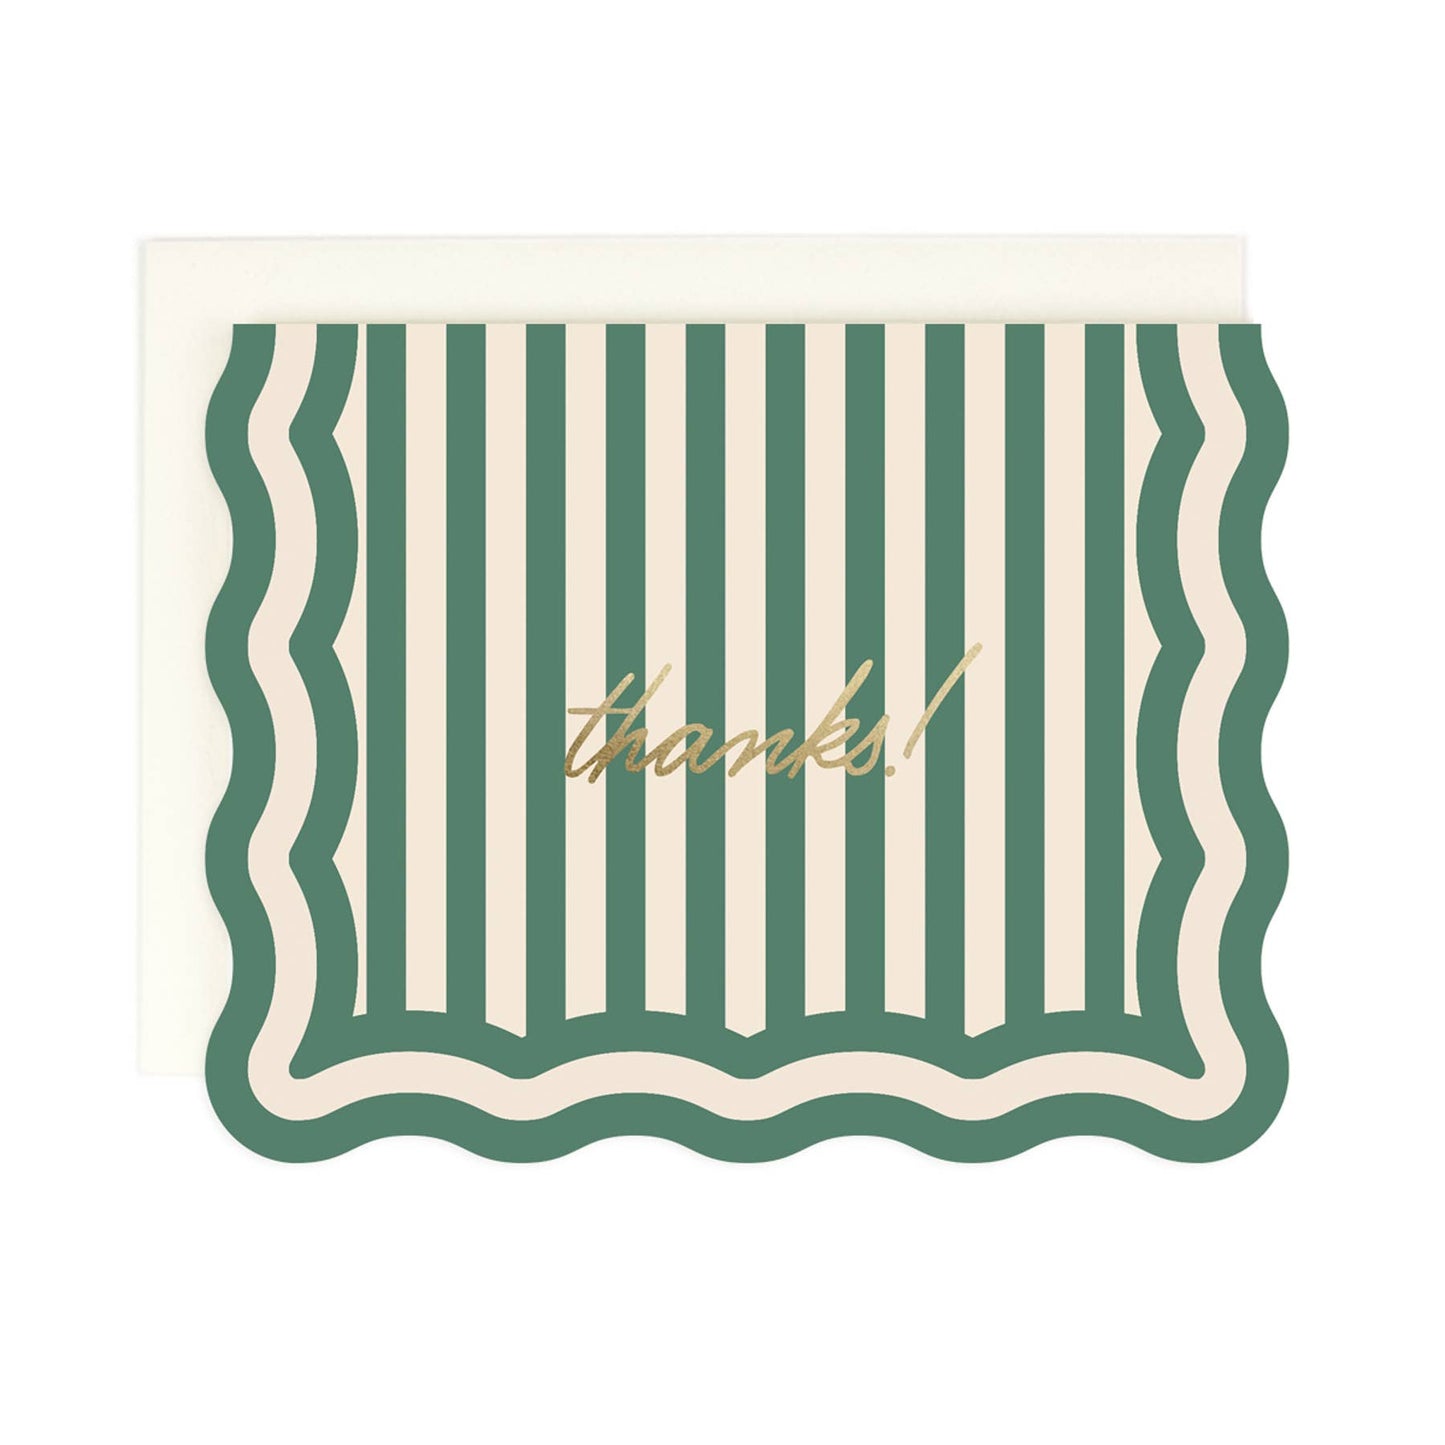 Thanks! Striped - Boxed set of 8